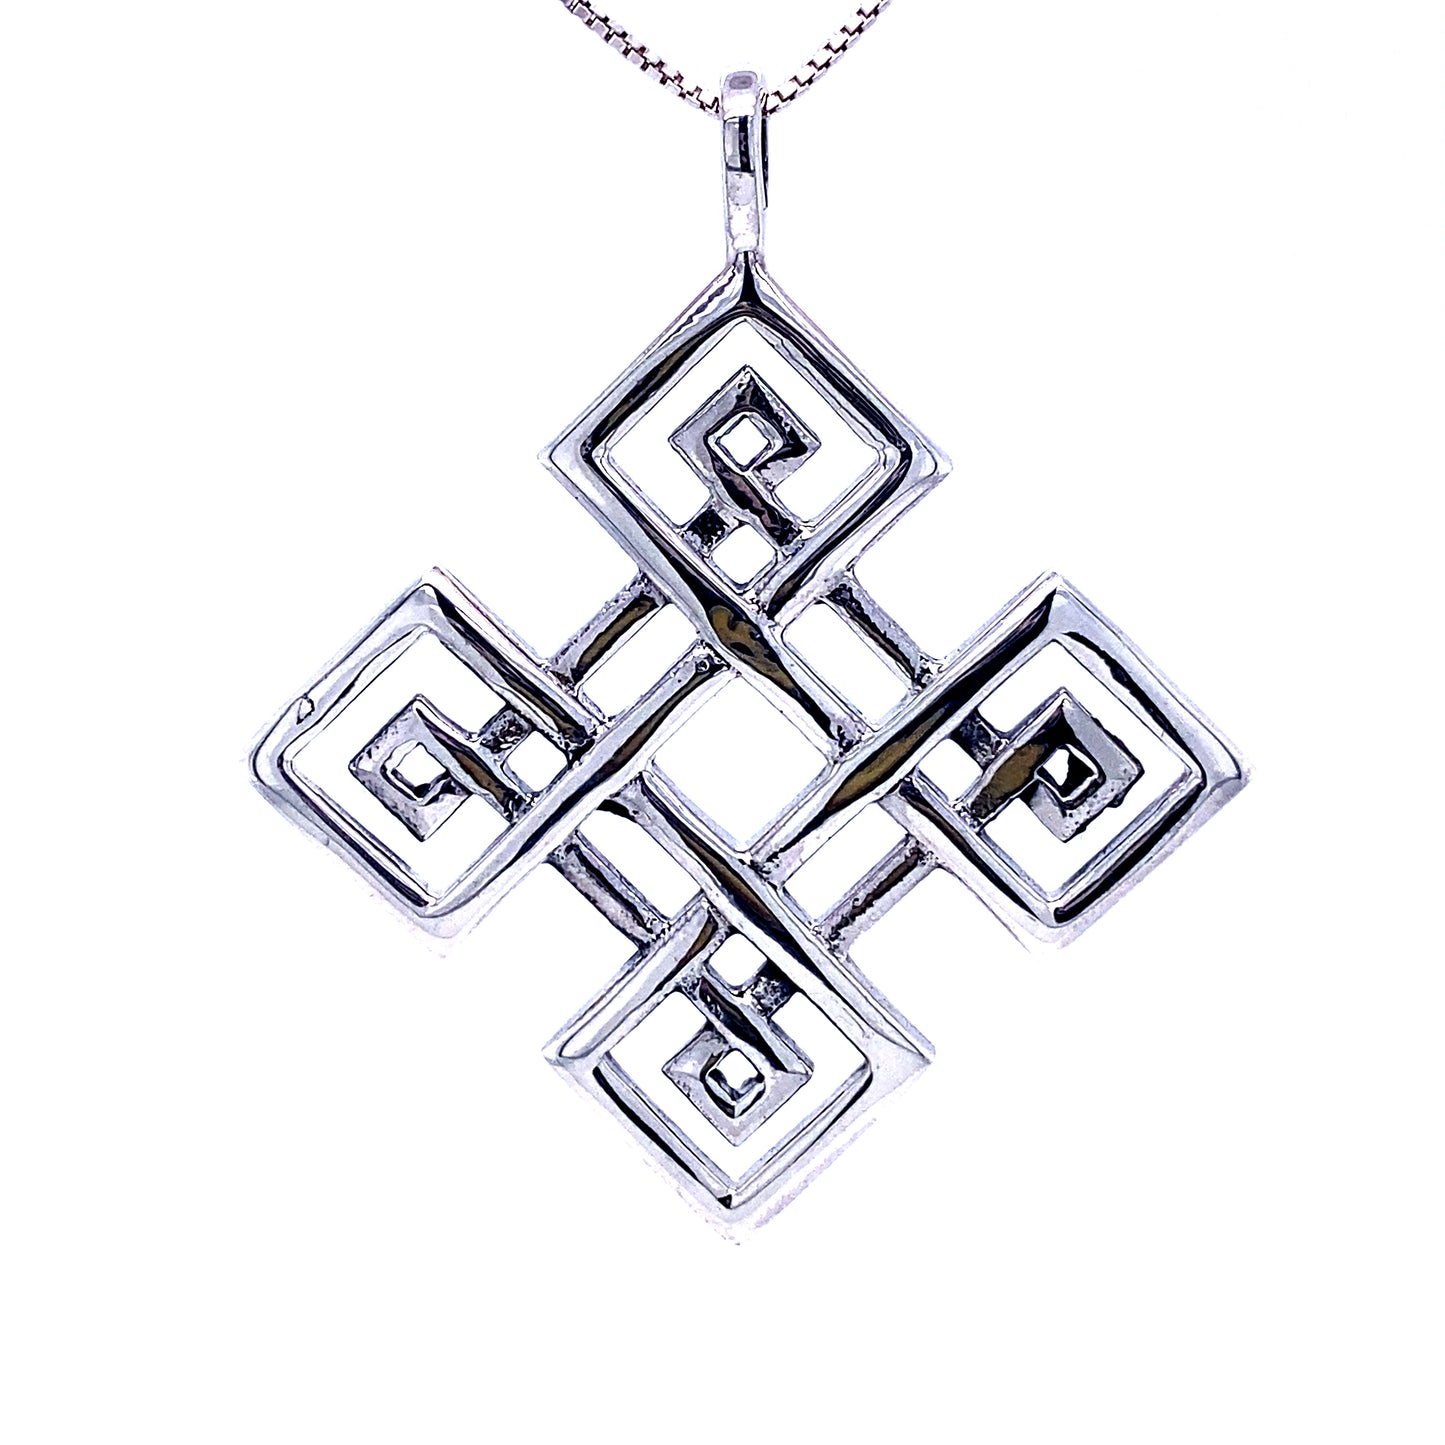 A Four-Pointed Celtic Knot Pendant made of .925 Sterling Silver by Super Silver.